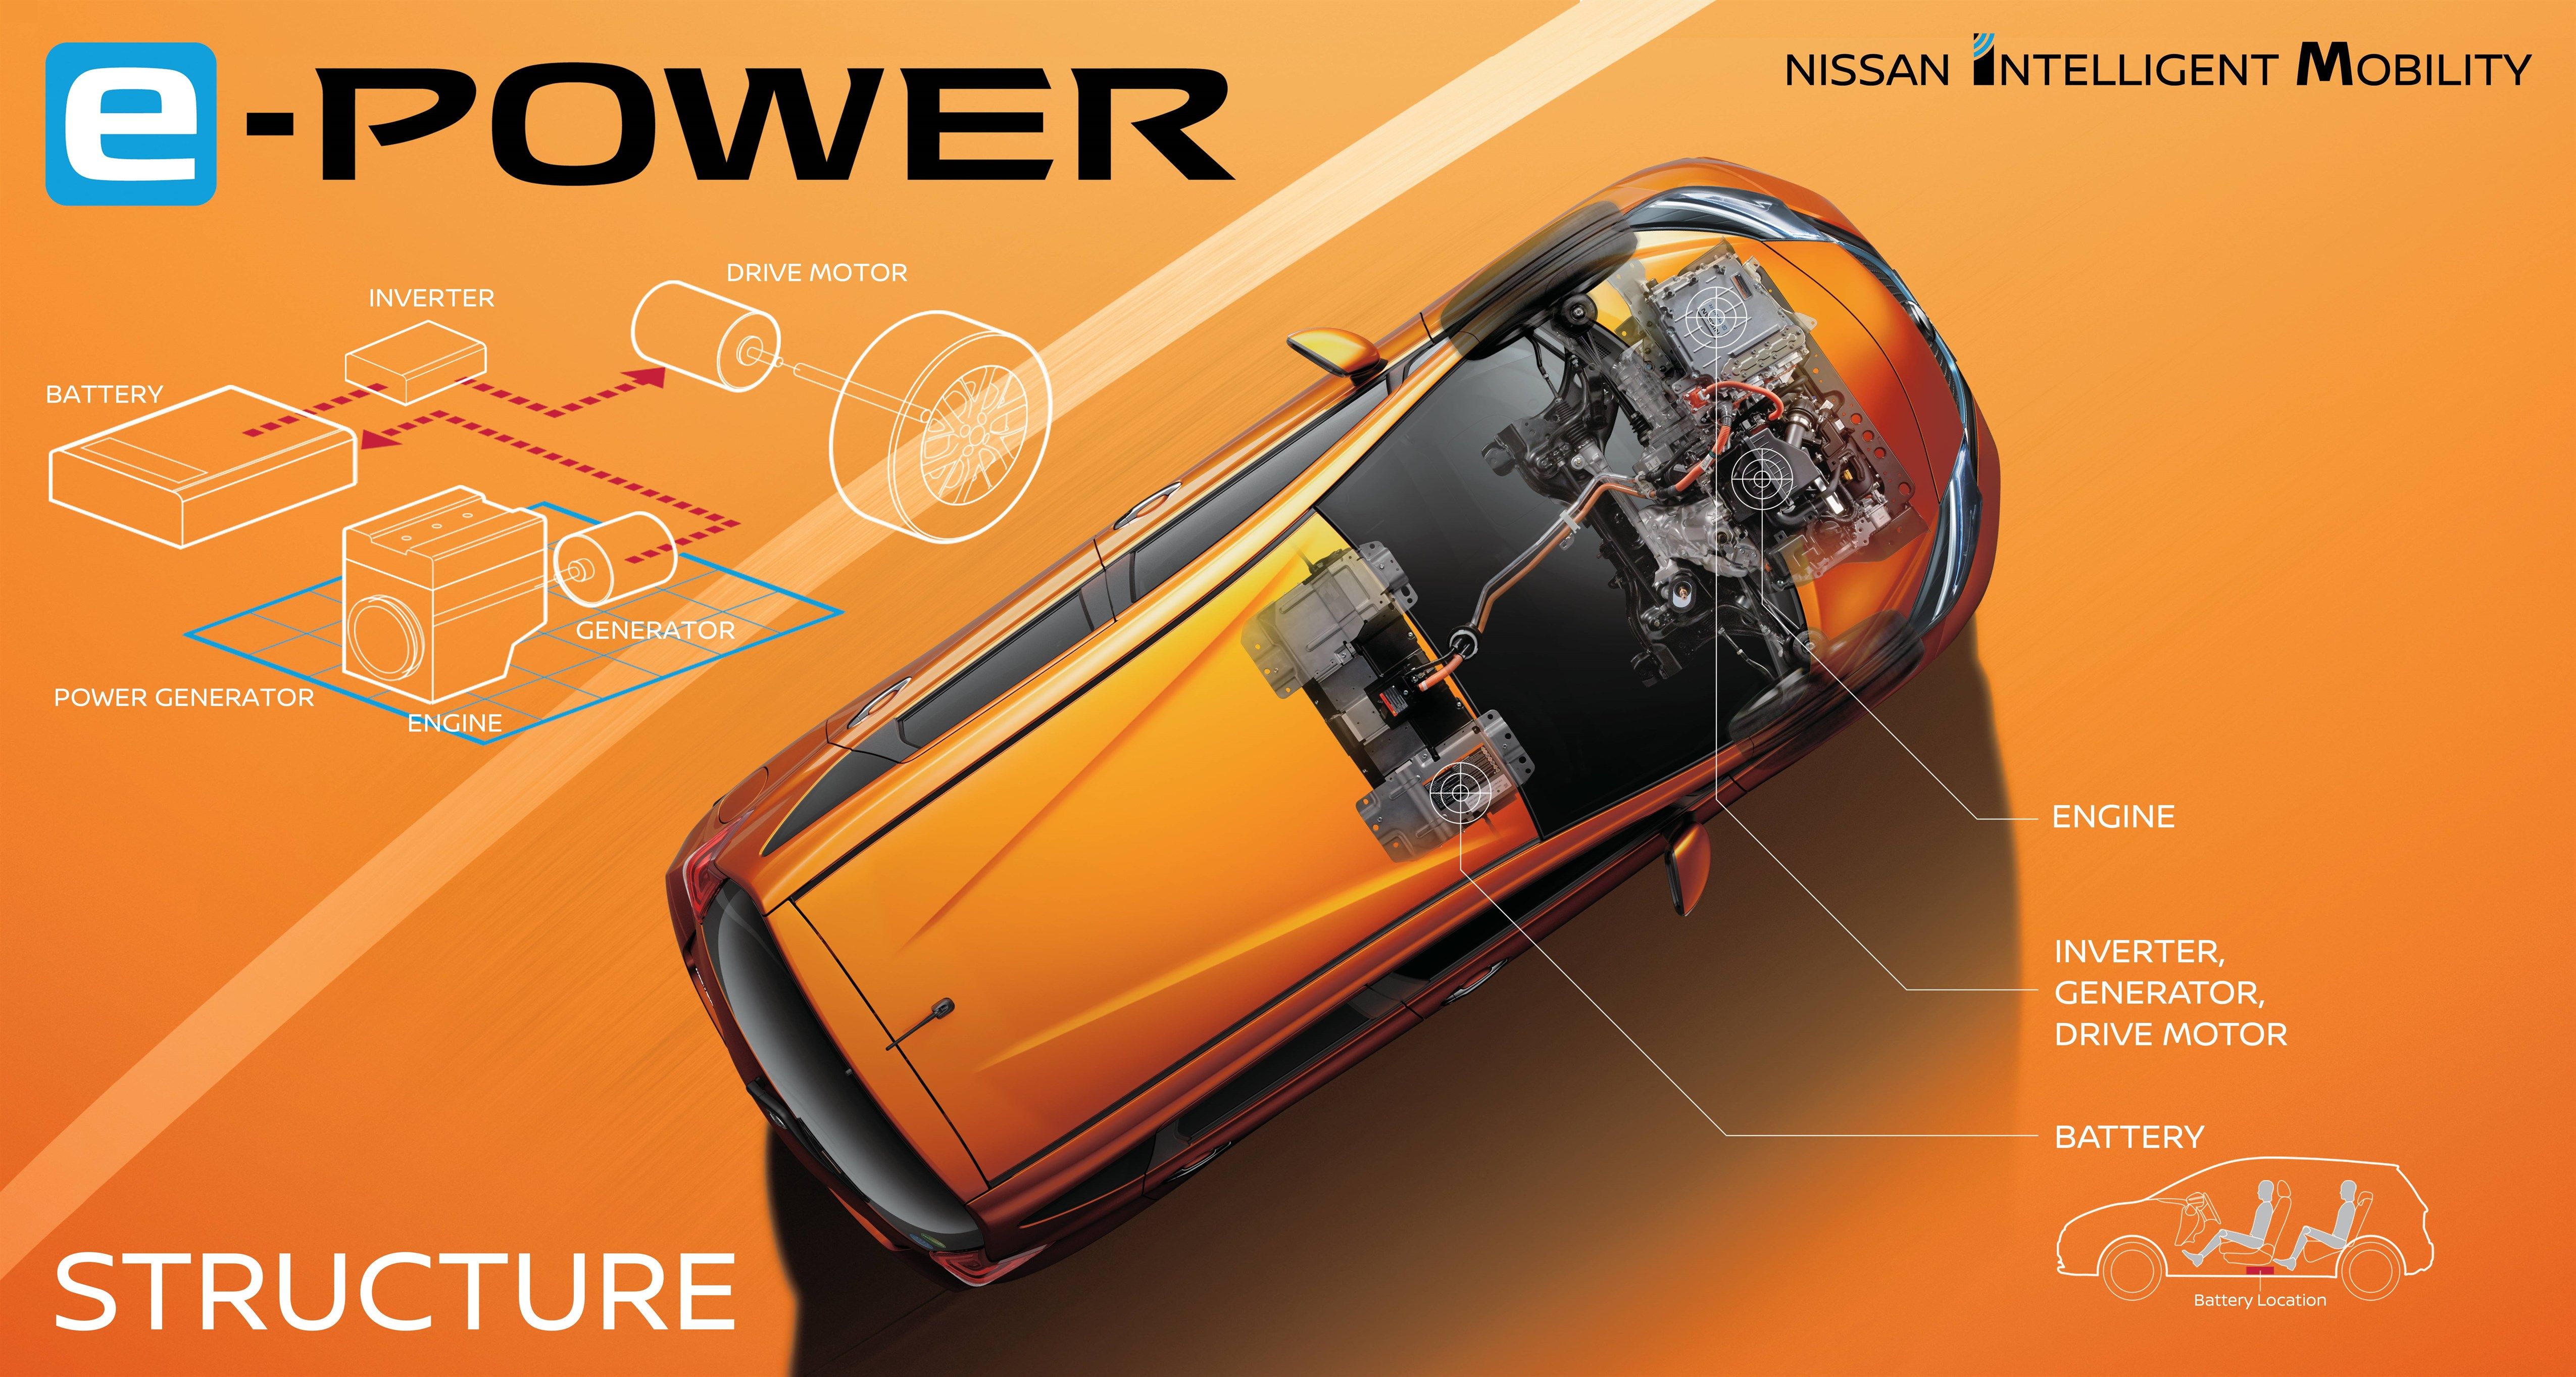 nissan s new e power drivetrain lets you drive further on electric power without stopping to charge image 1